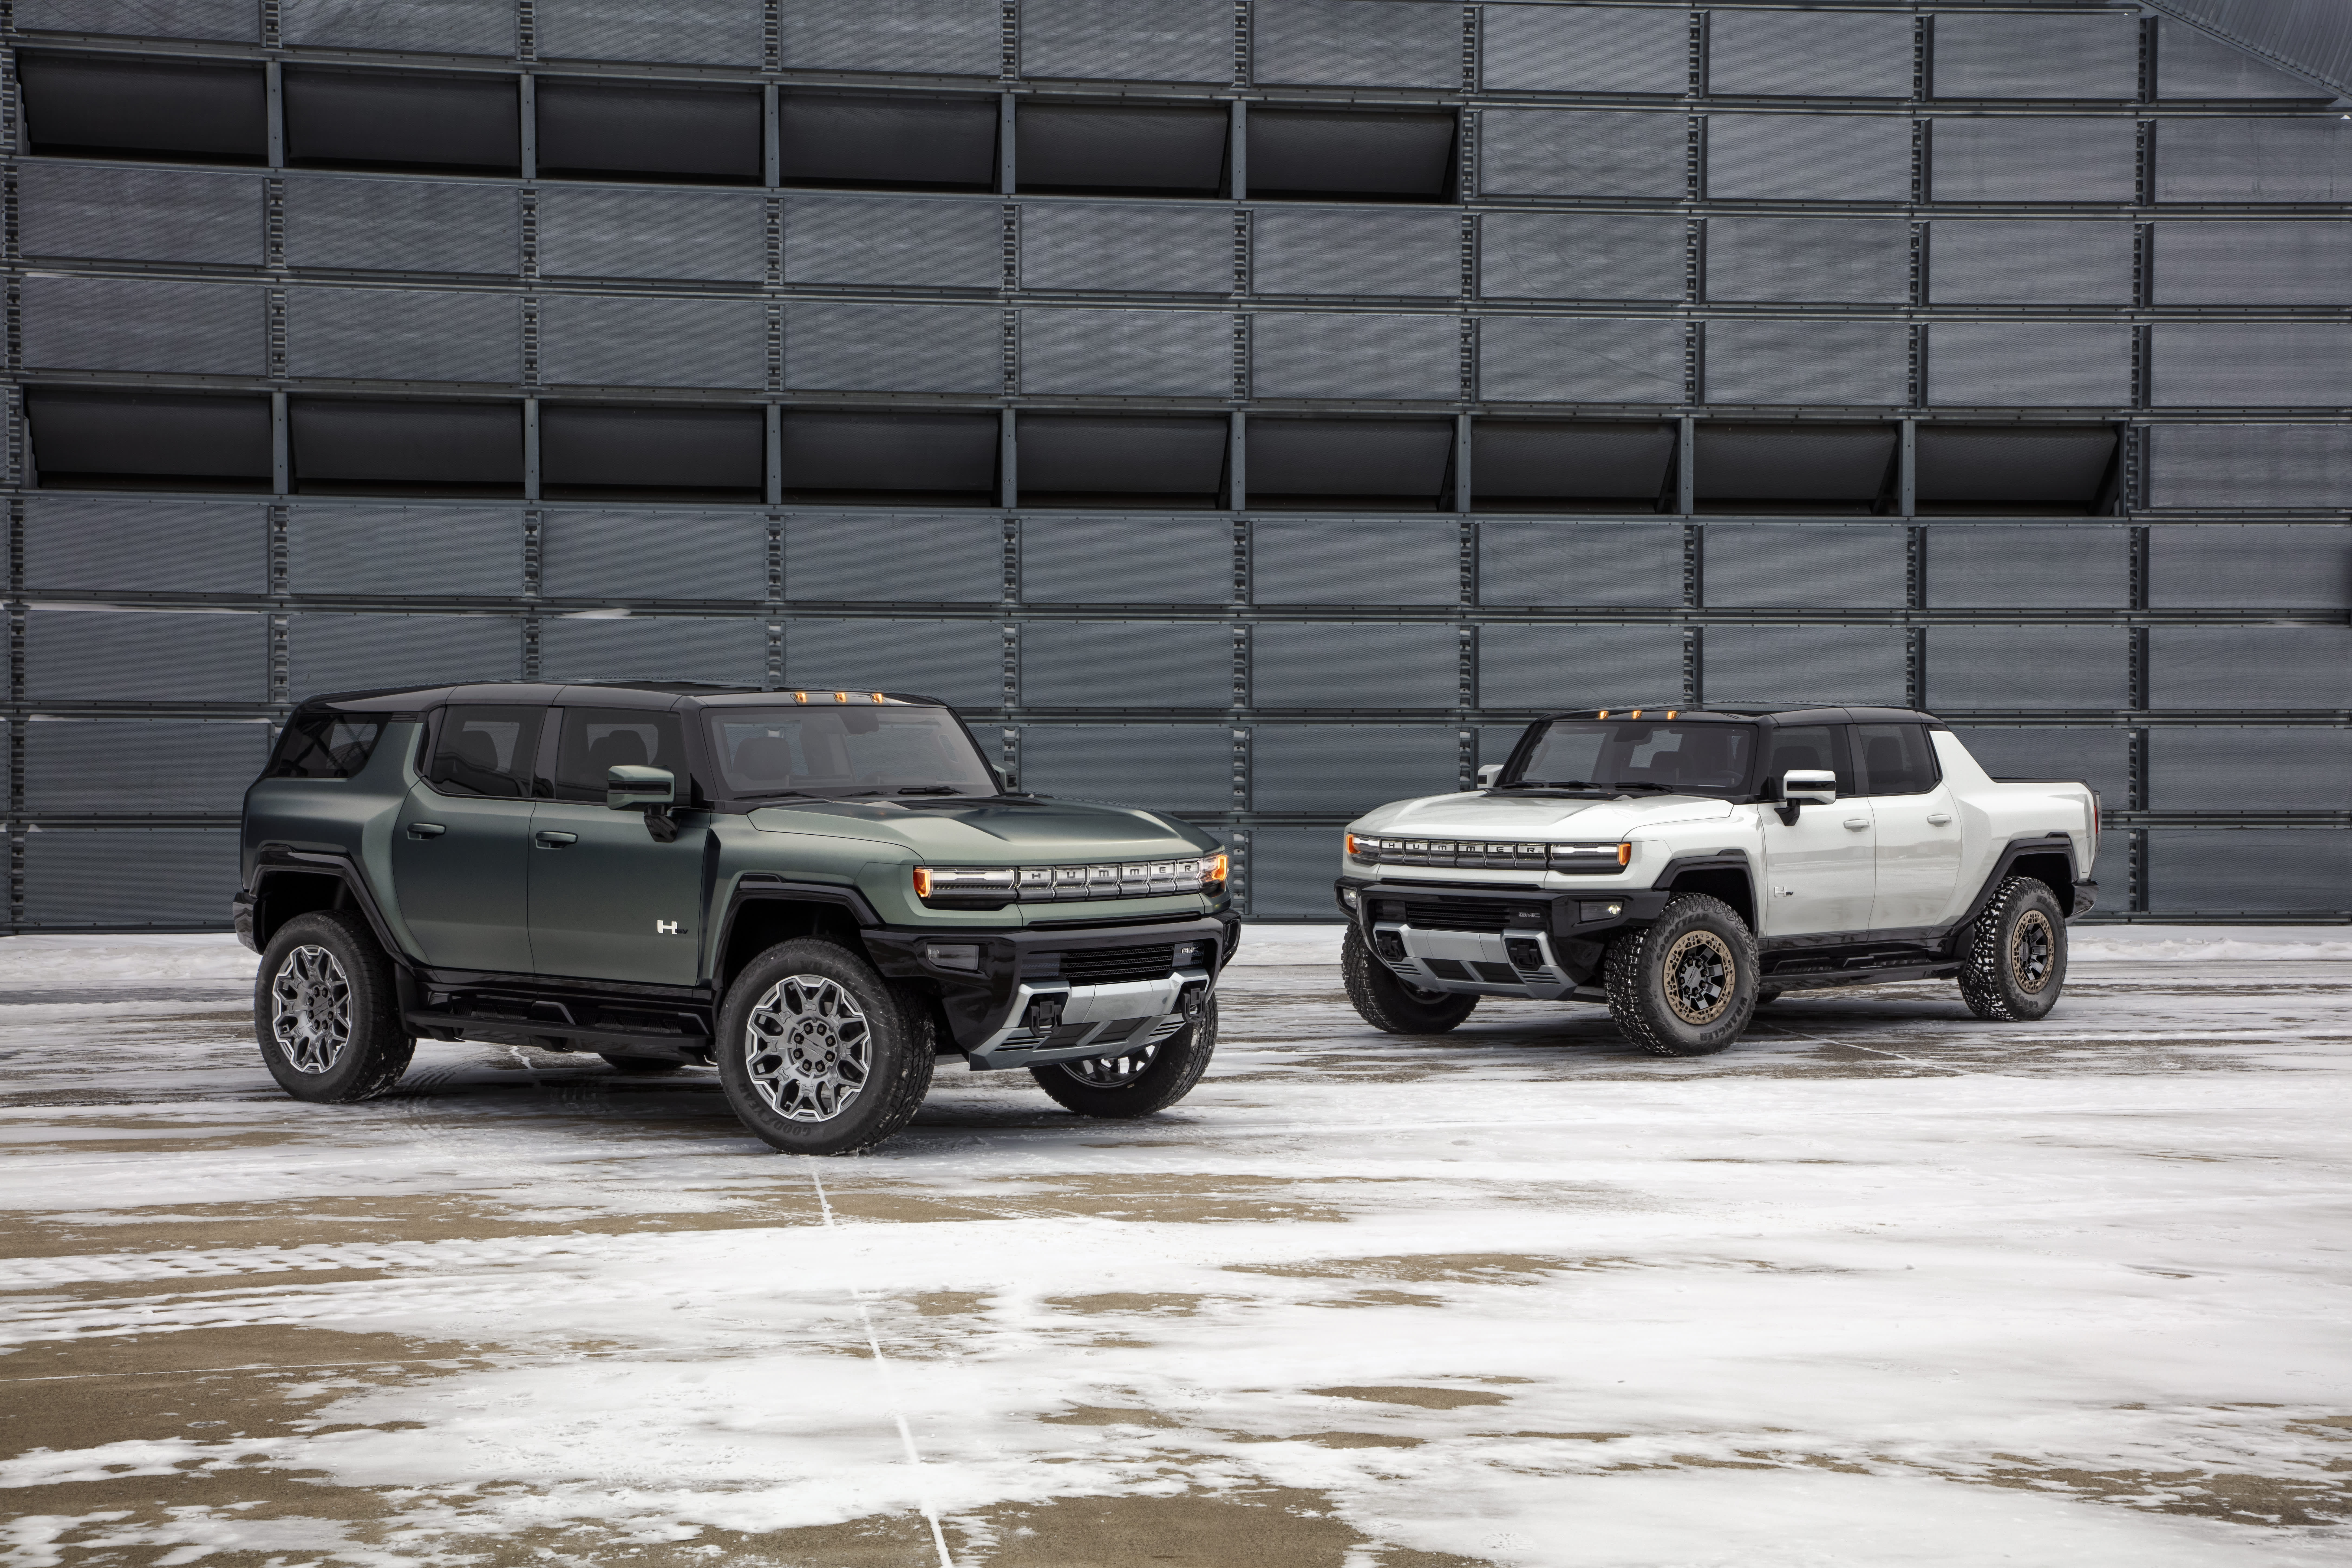 GM unveils $ 110,000 electric Hummer sport utility vehicle